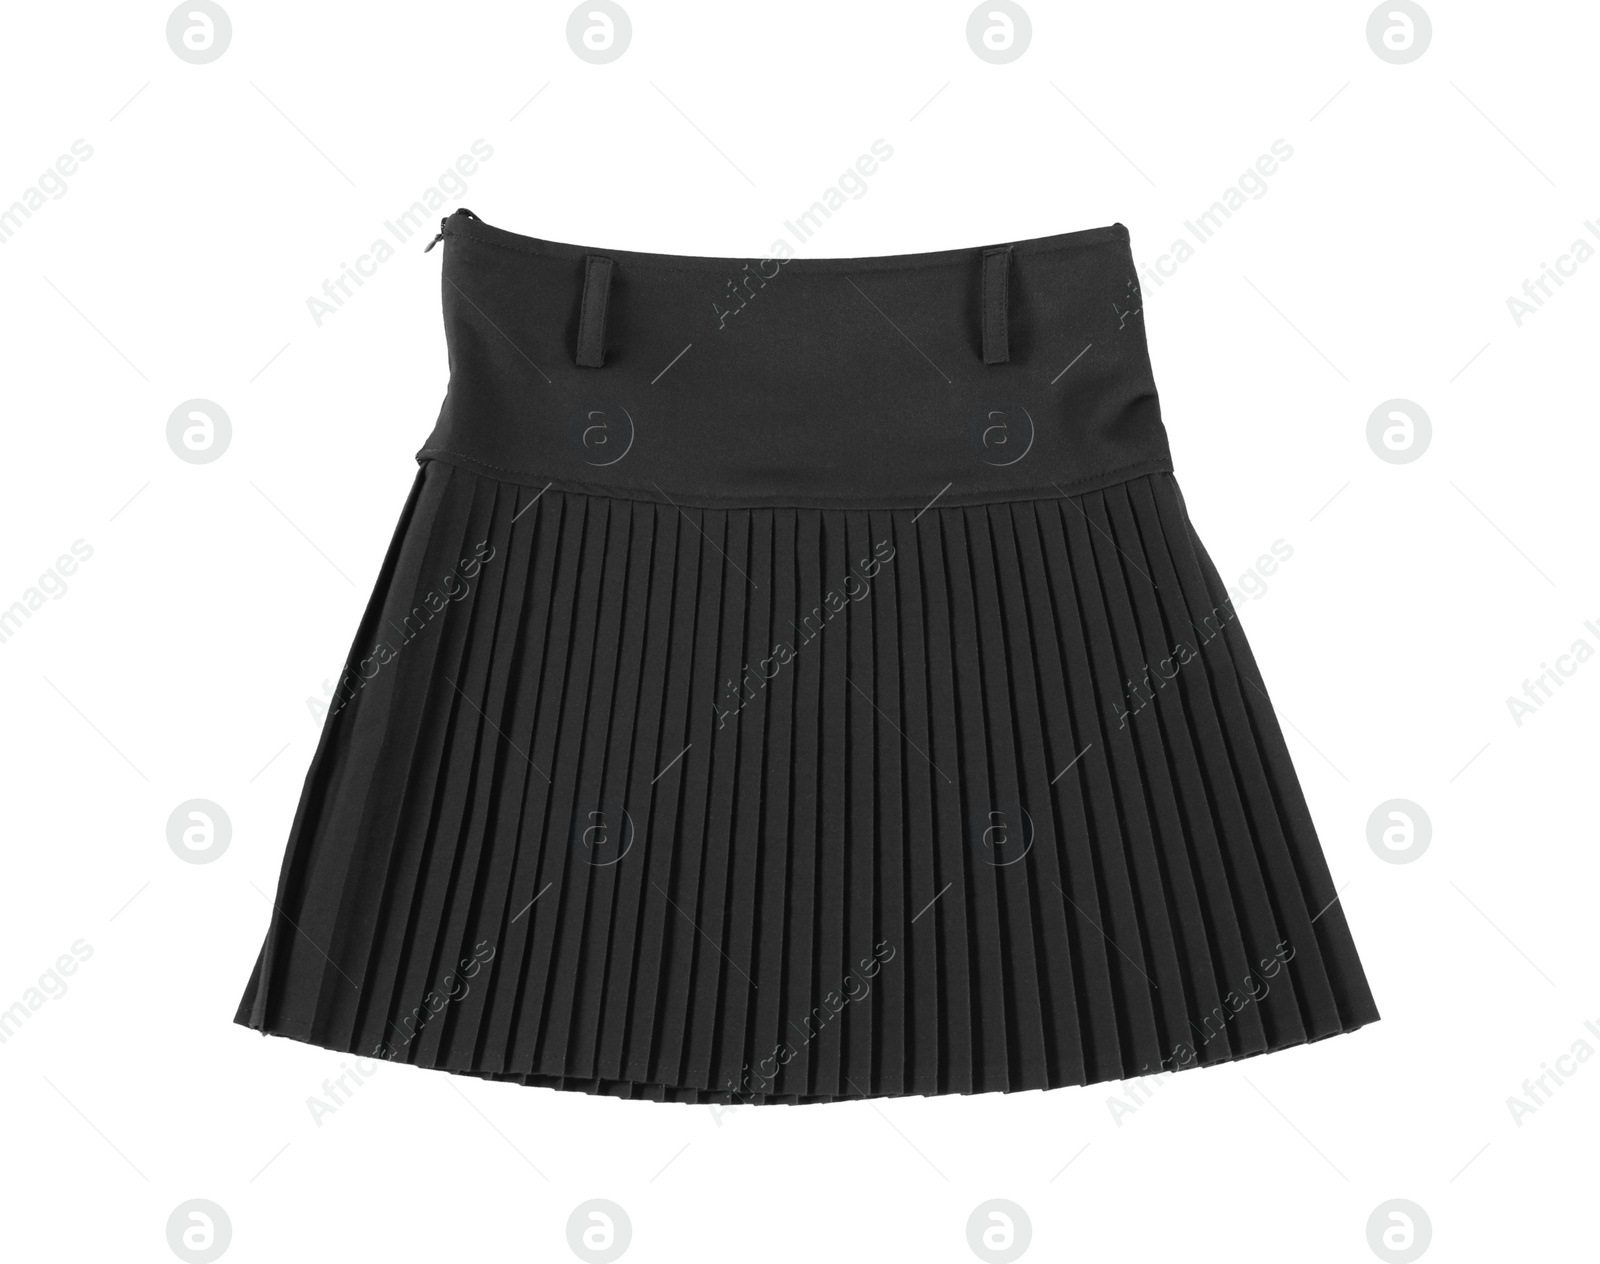 Photo of Black pleated skirt isolated on white, top view. Stylish school uniform